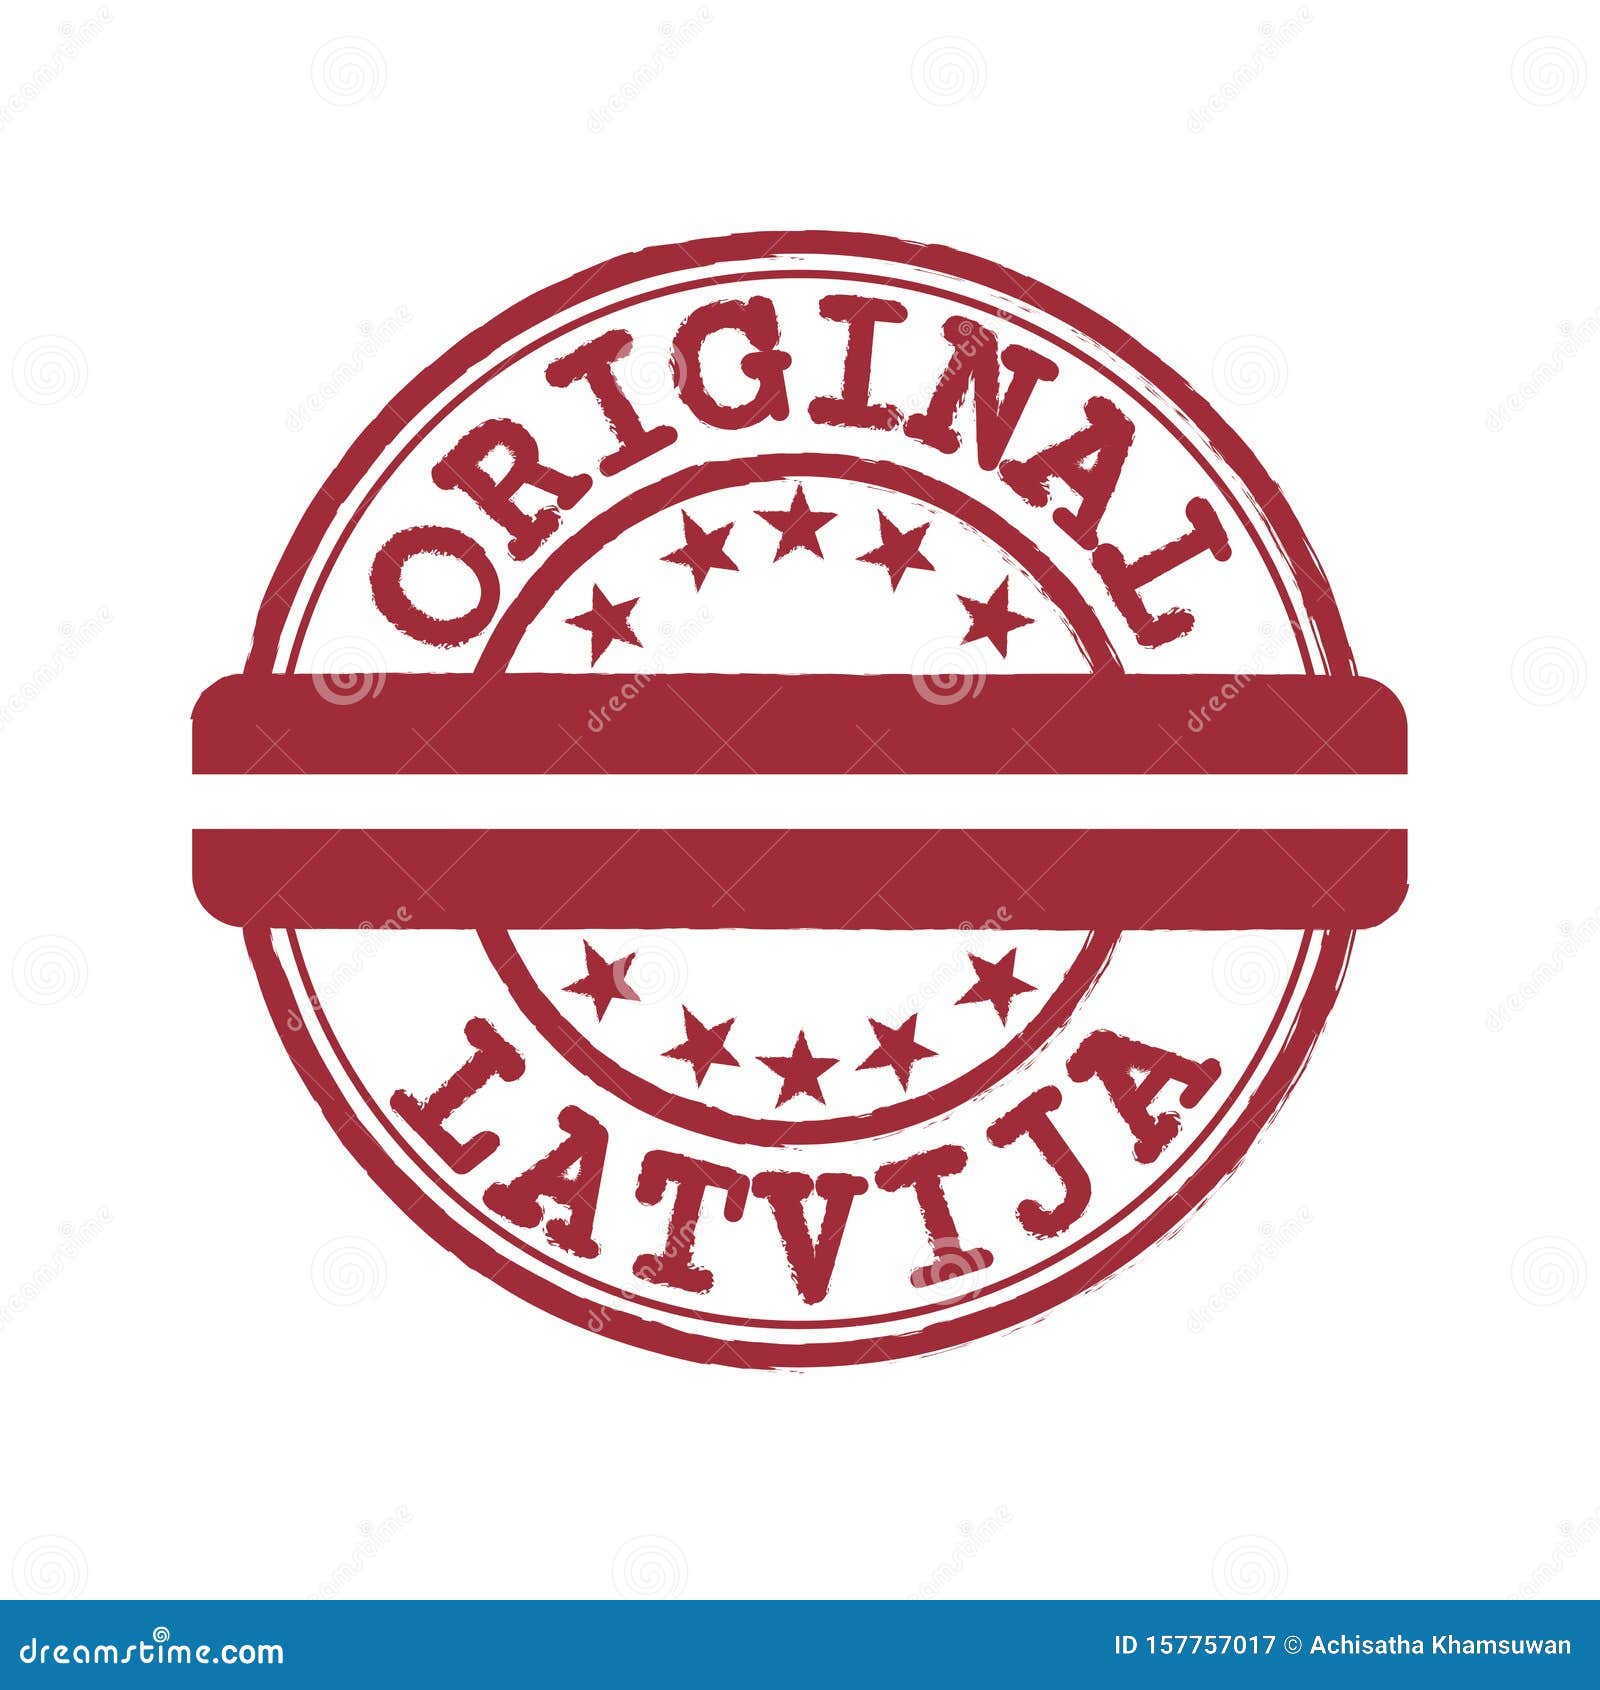 Vector Stamp Of Original Logo With Text Latvija And Tying In The Middle With Latvia Flag Stock Vector Illustration Of Field Business 157757017